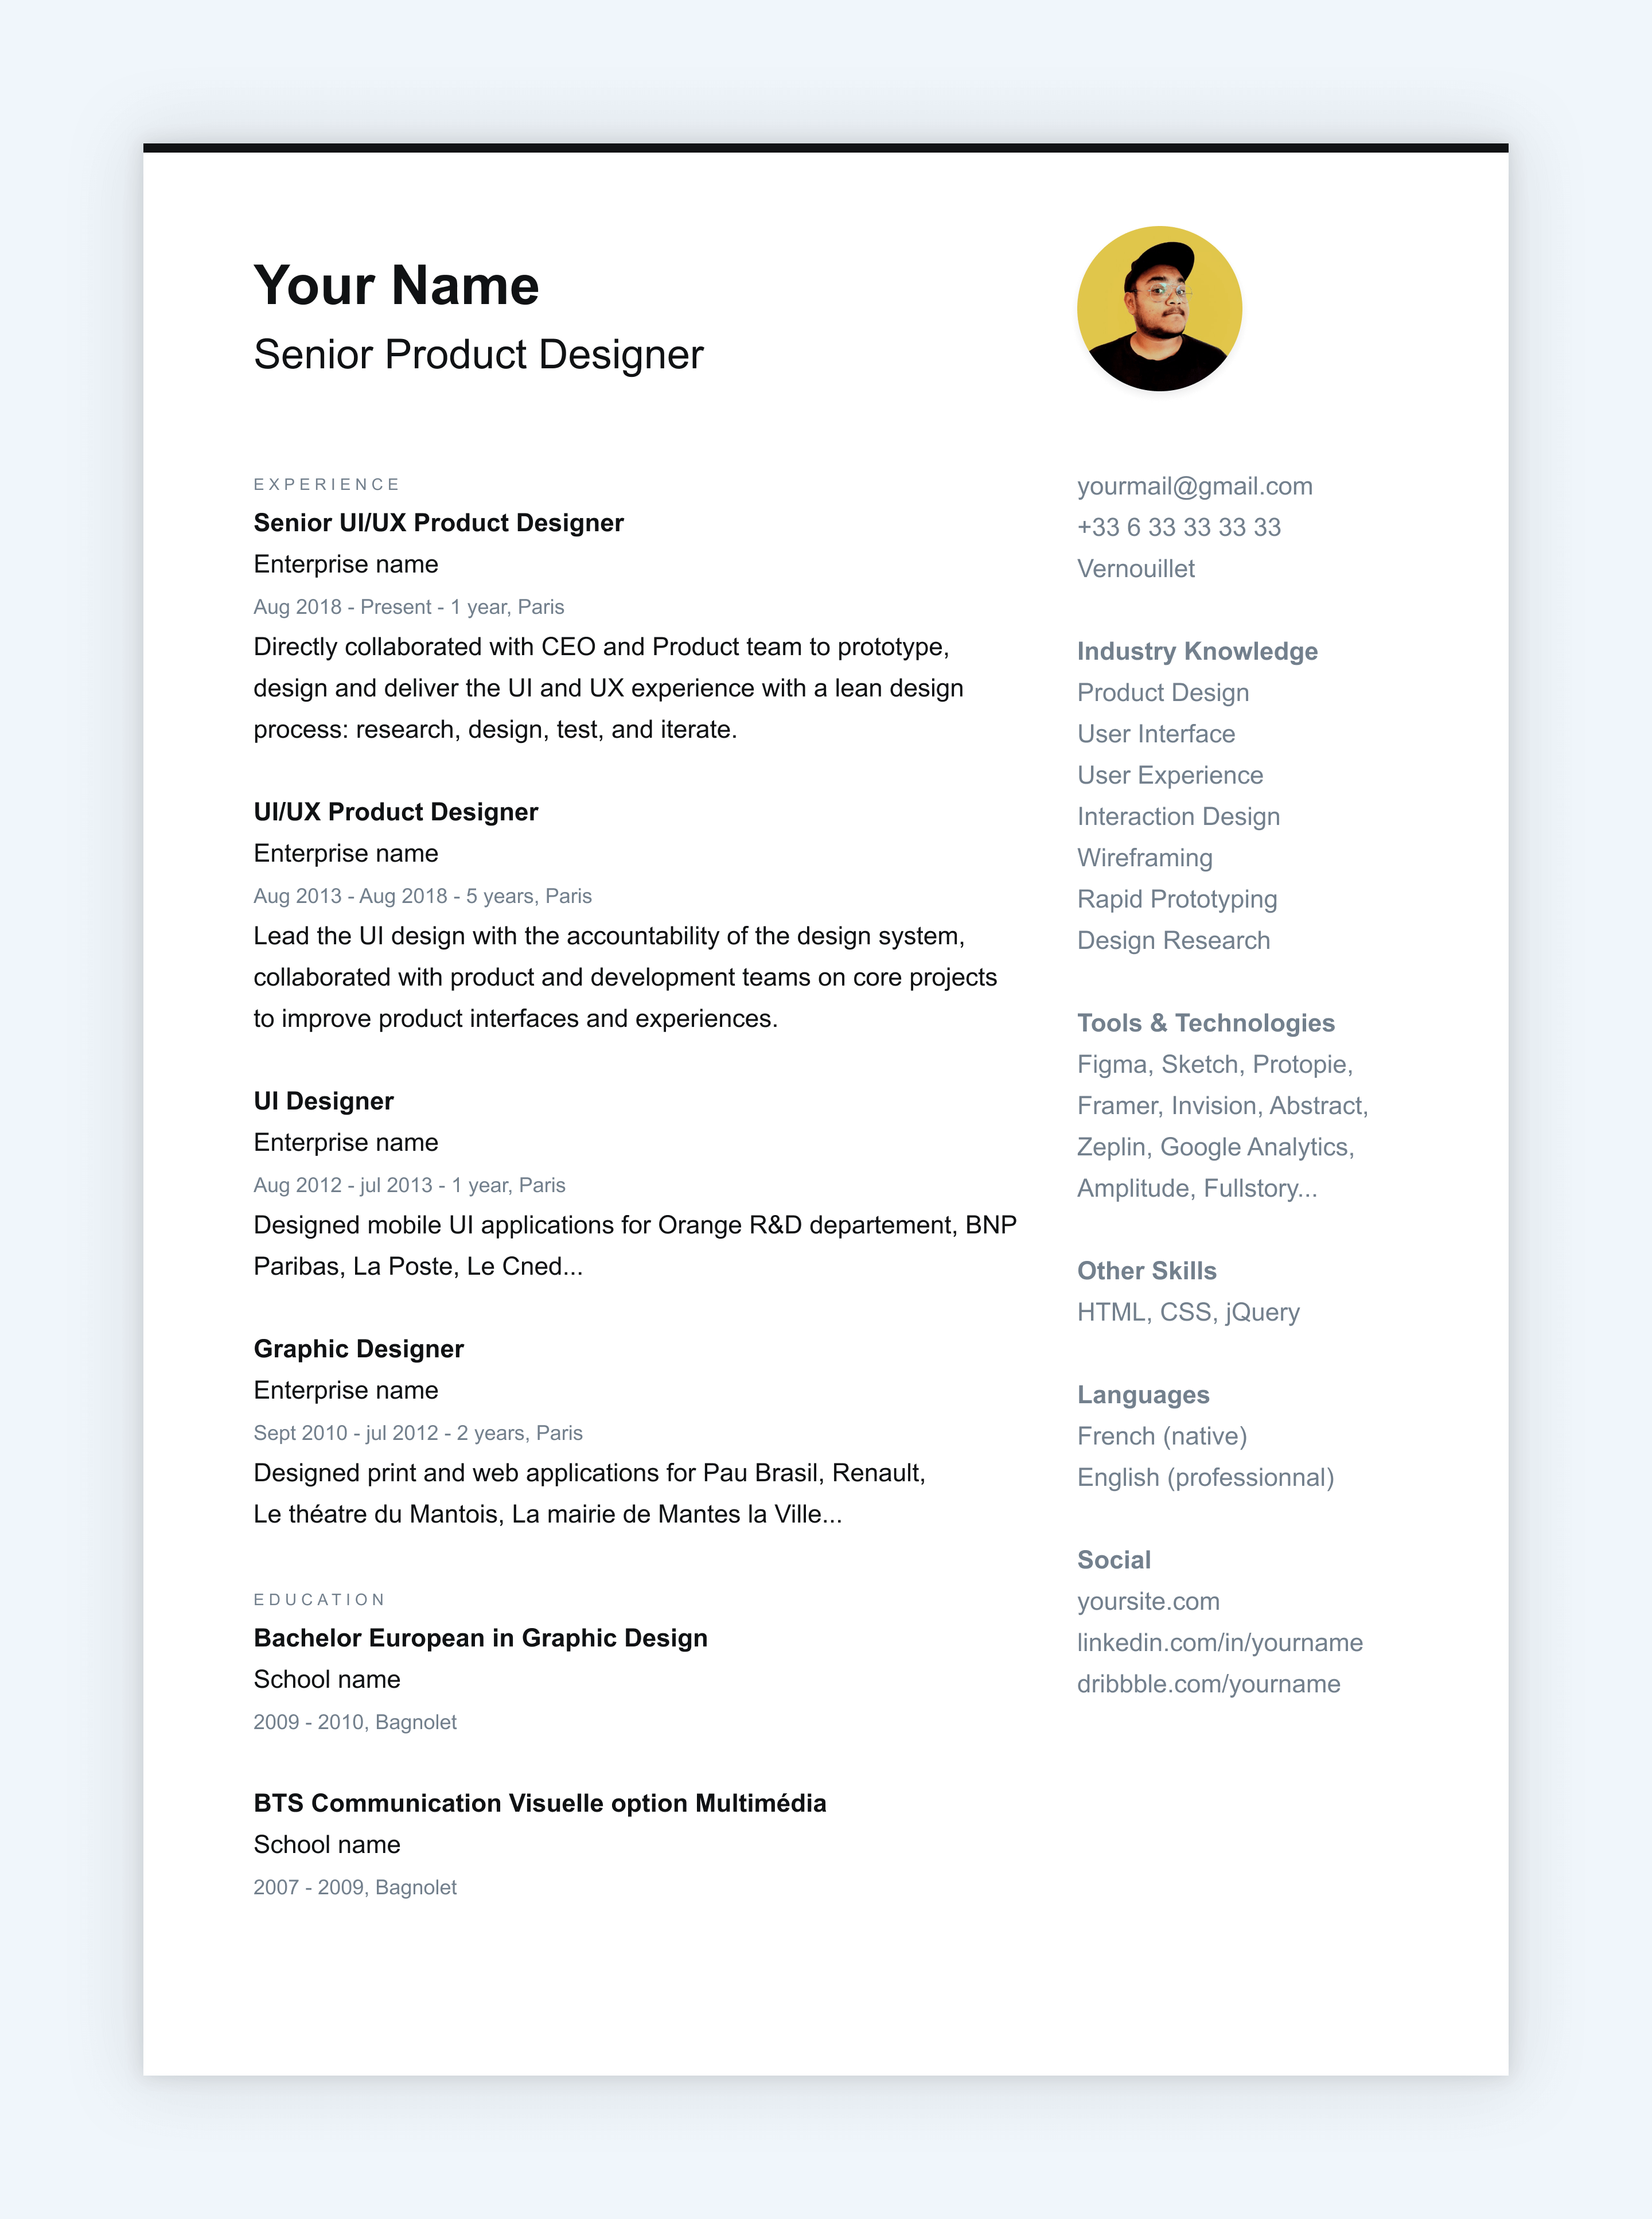 Screenshot of a resume template on a grey background